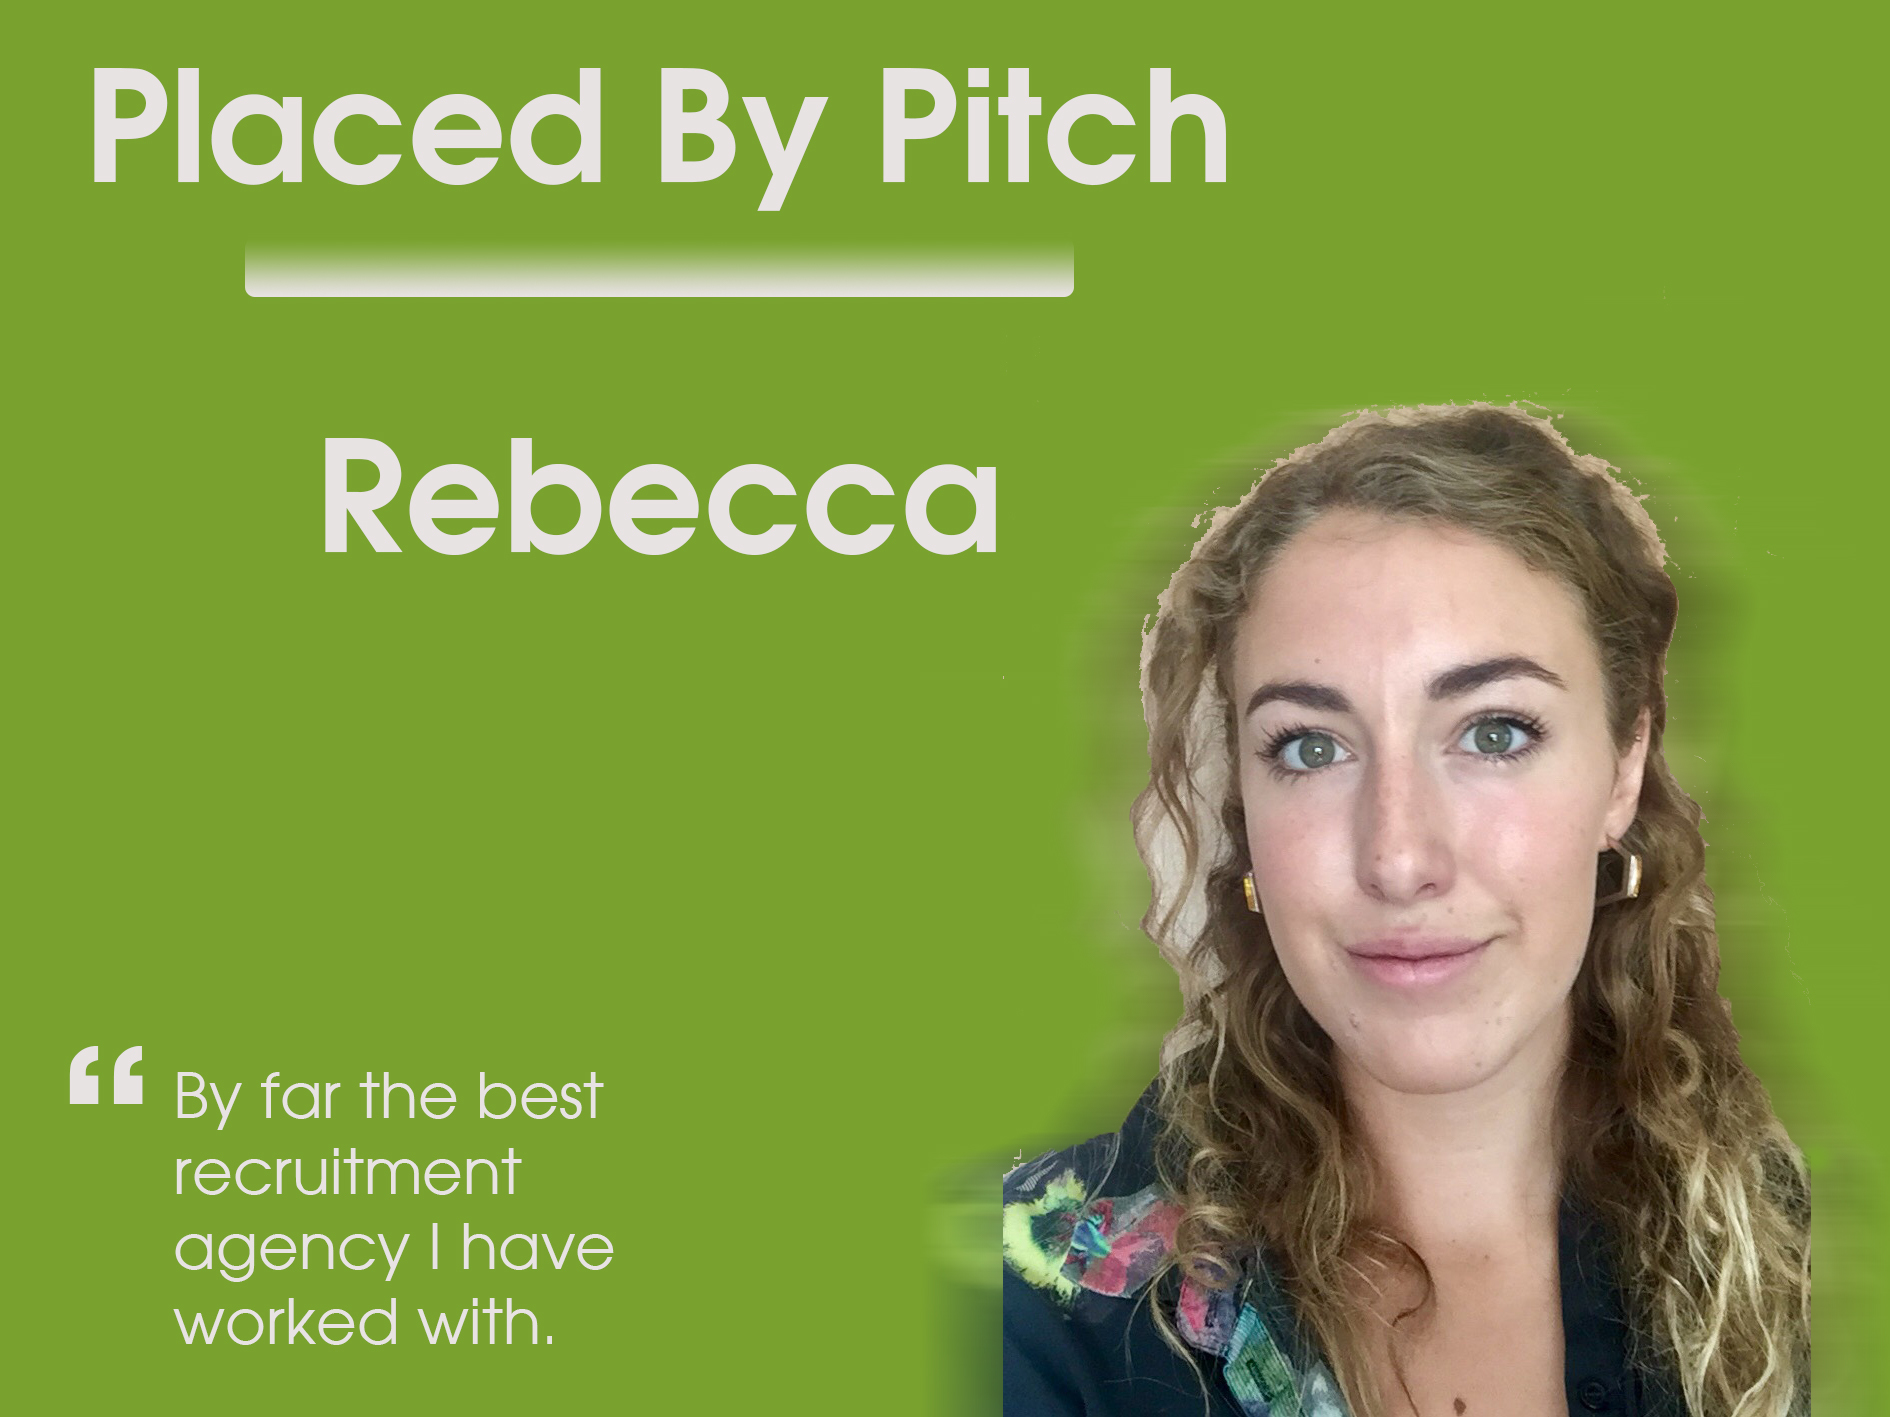 Rebecca who placed by Pitch